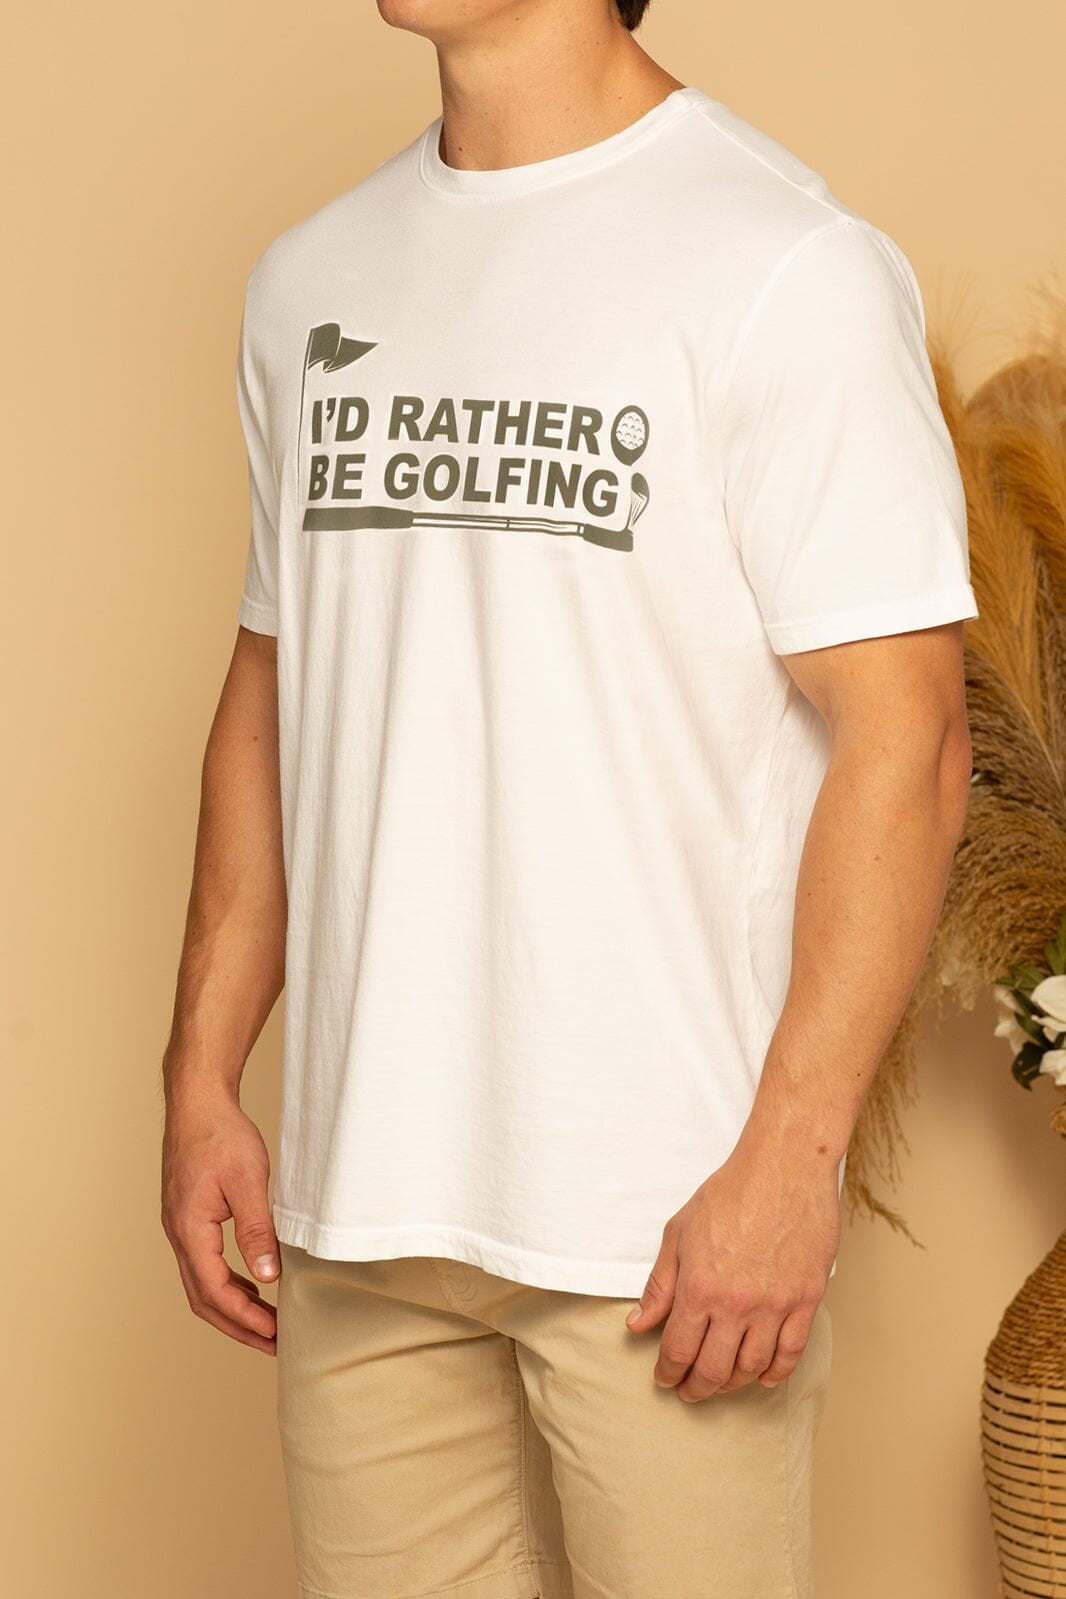 I'D RATHER BE GOLFING TEE - WHITE - S